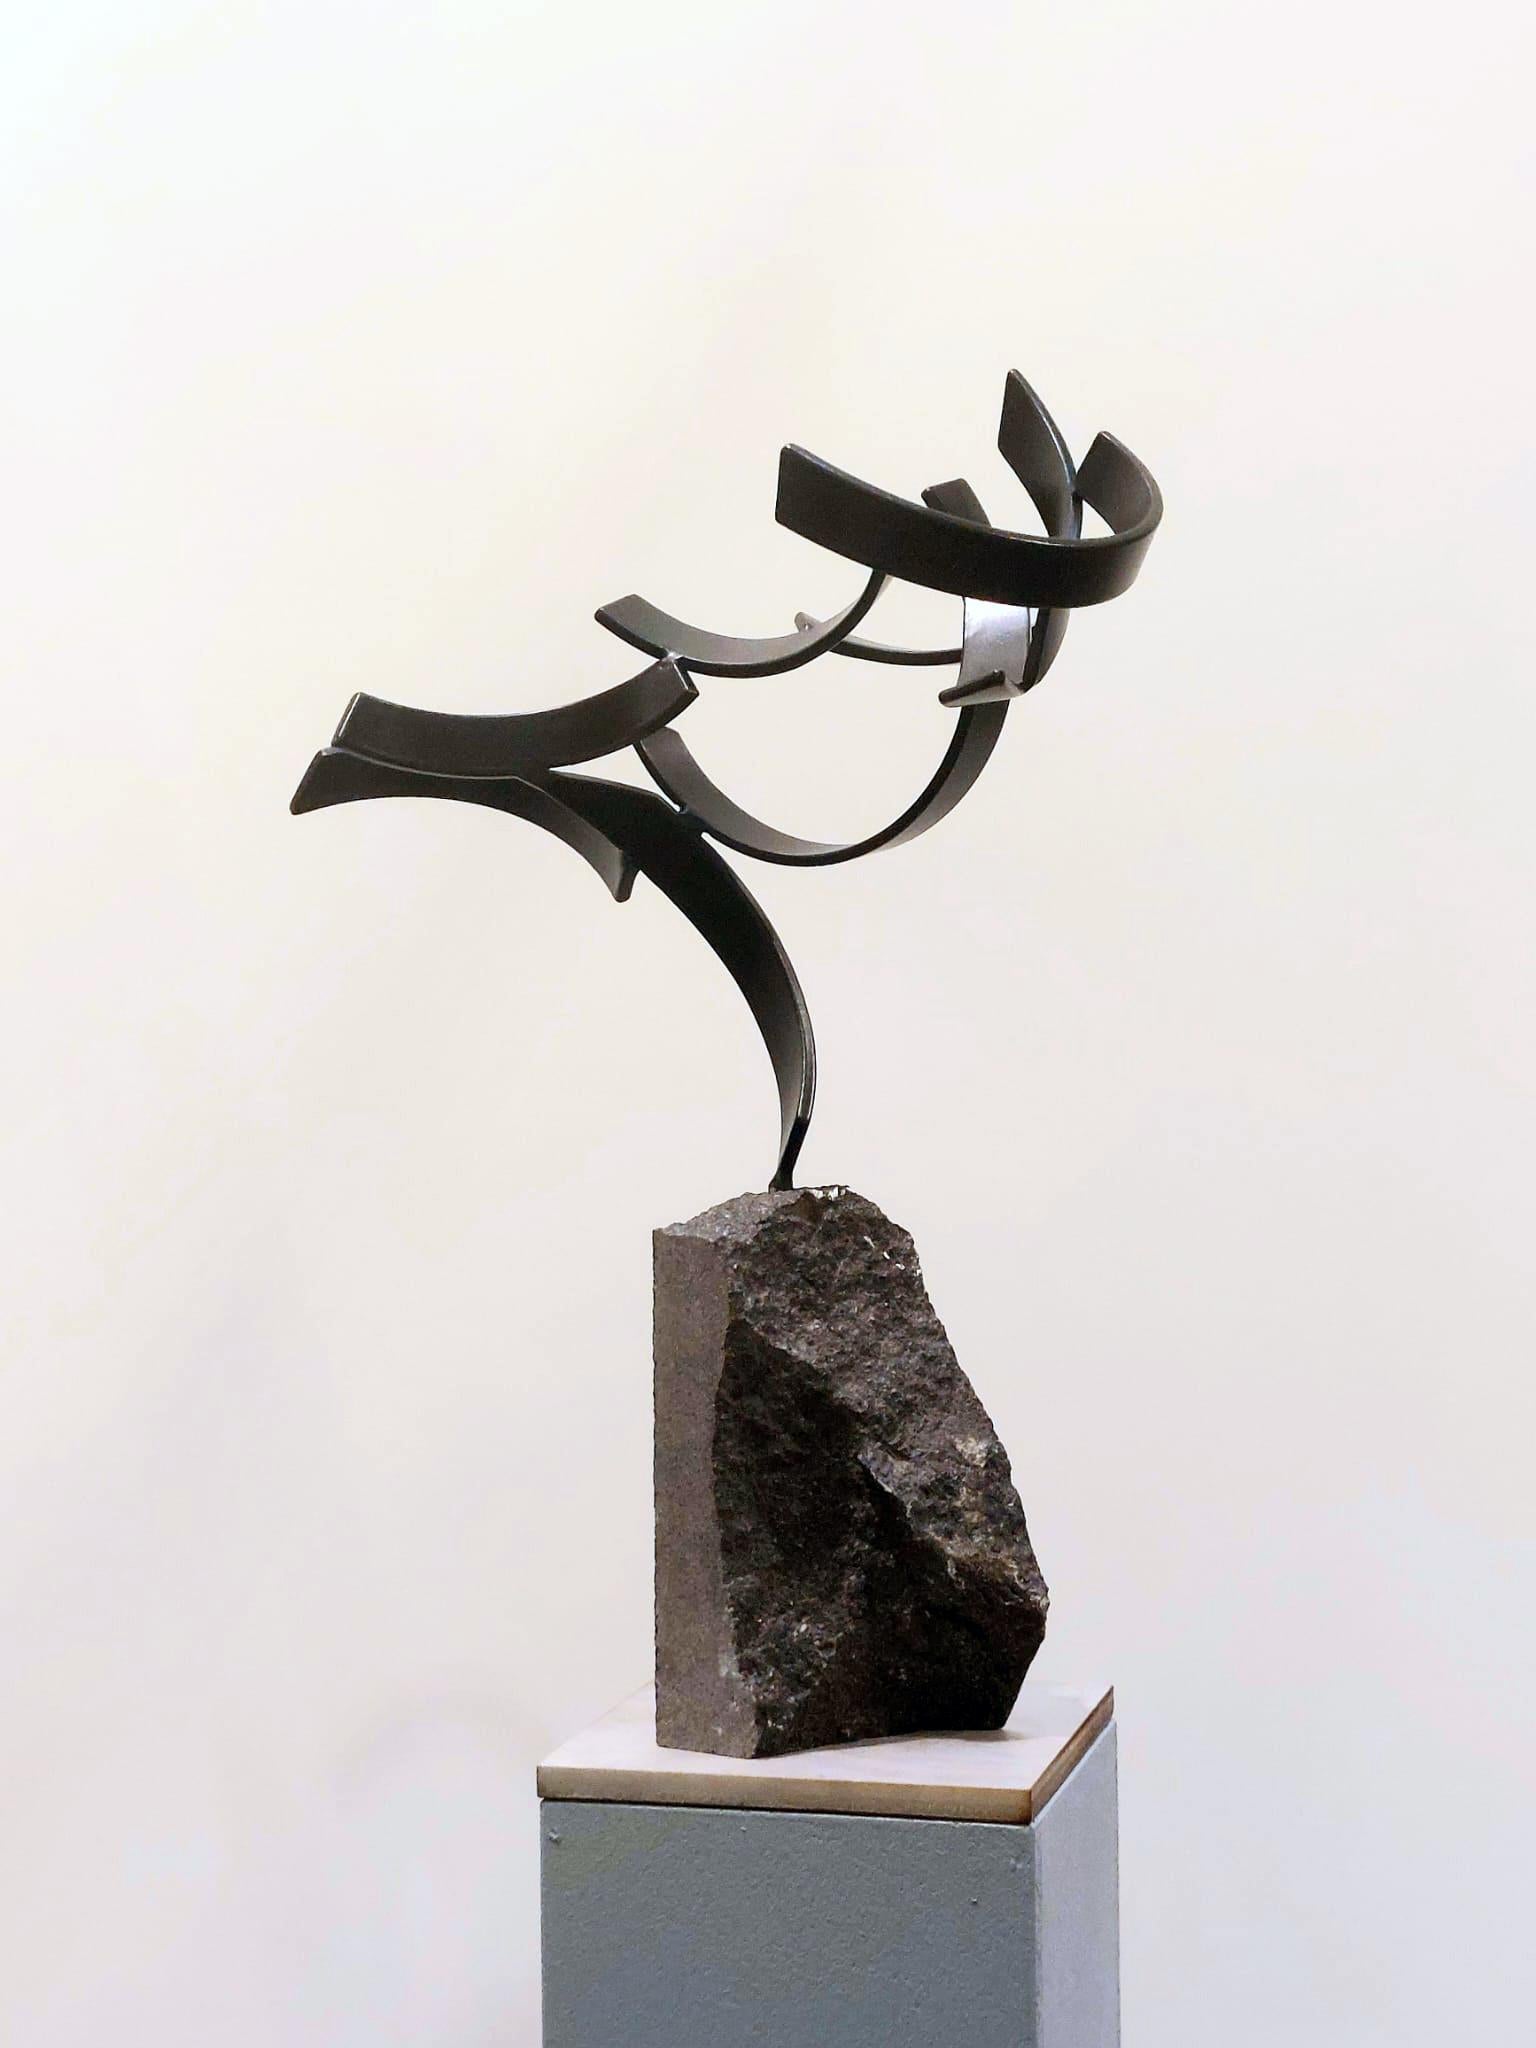 This beautiful large corroded steel  sculpture can be used for indoor or outdoors. It makes for an elegant statement in any garden, lobby or private home.

Artist: Kuno